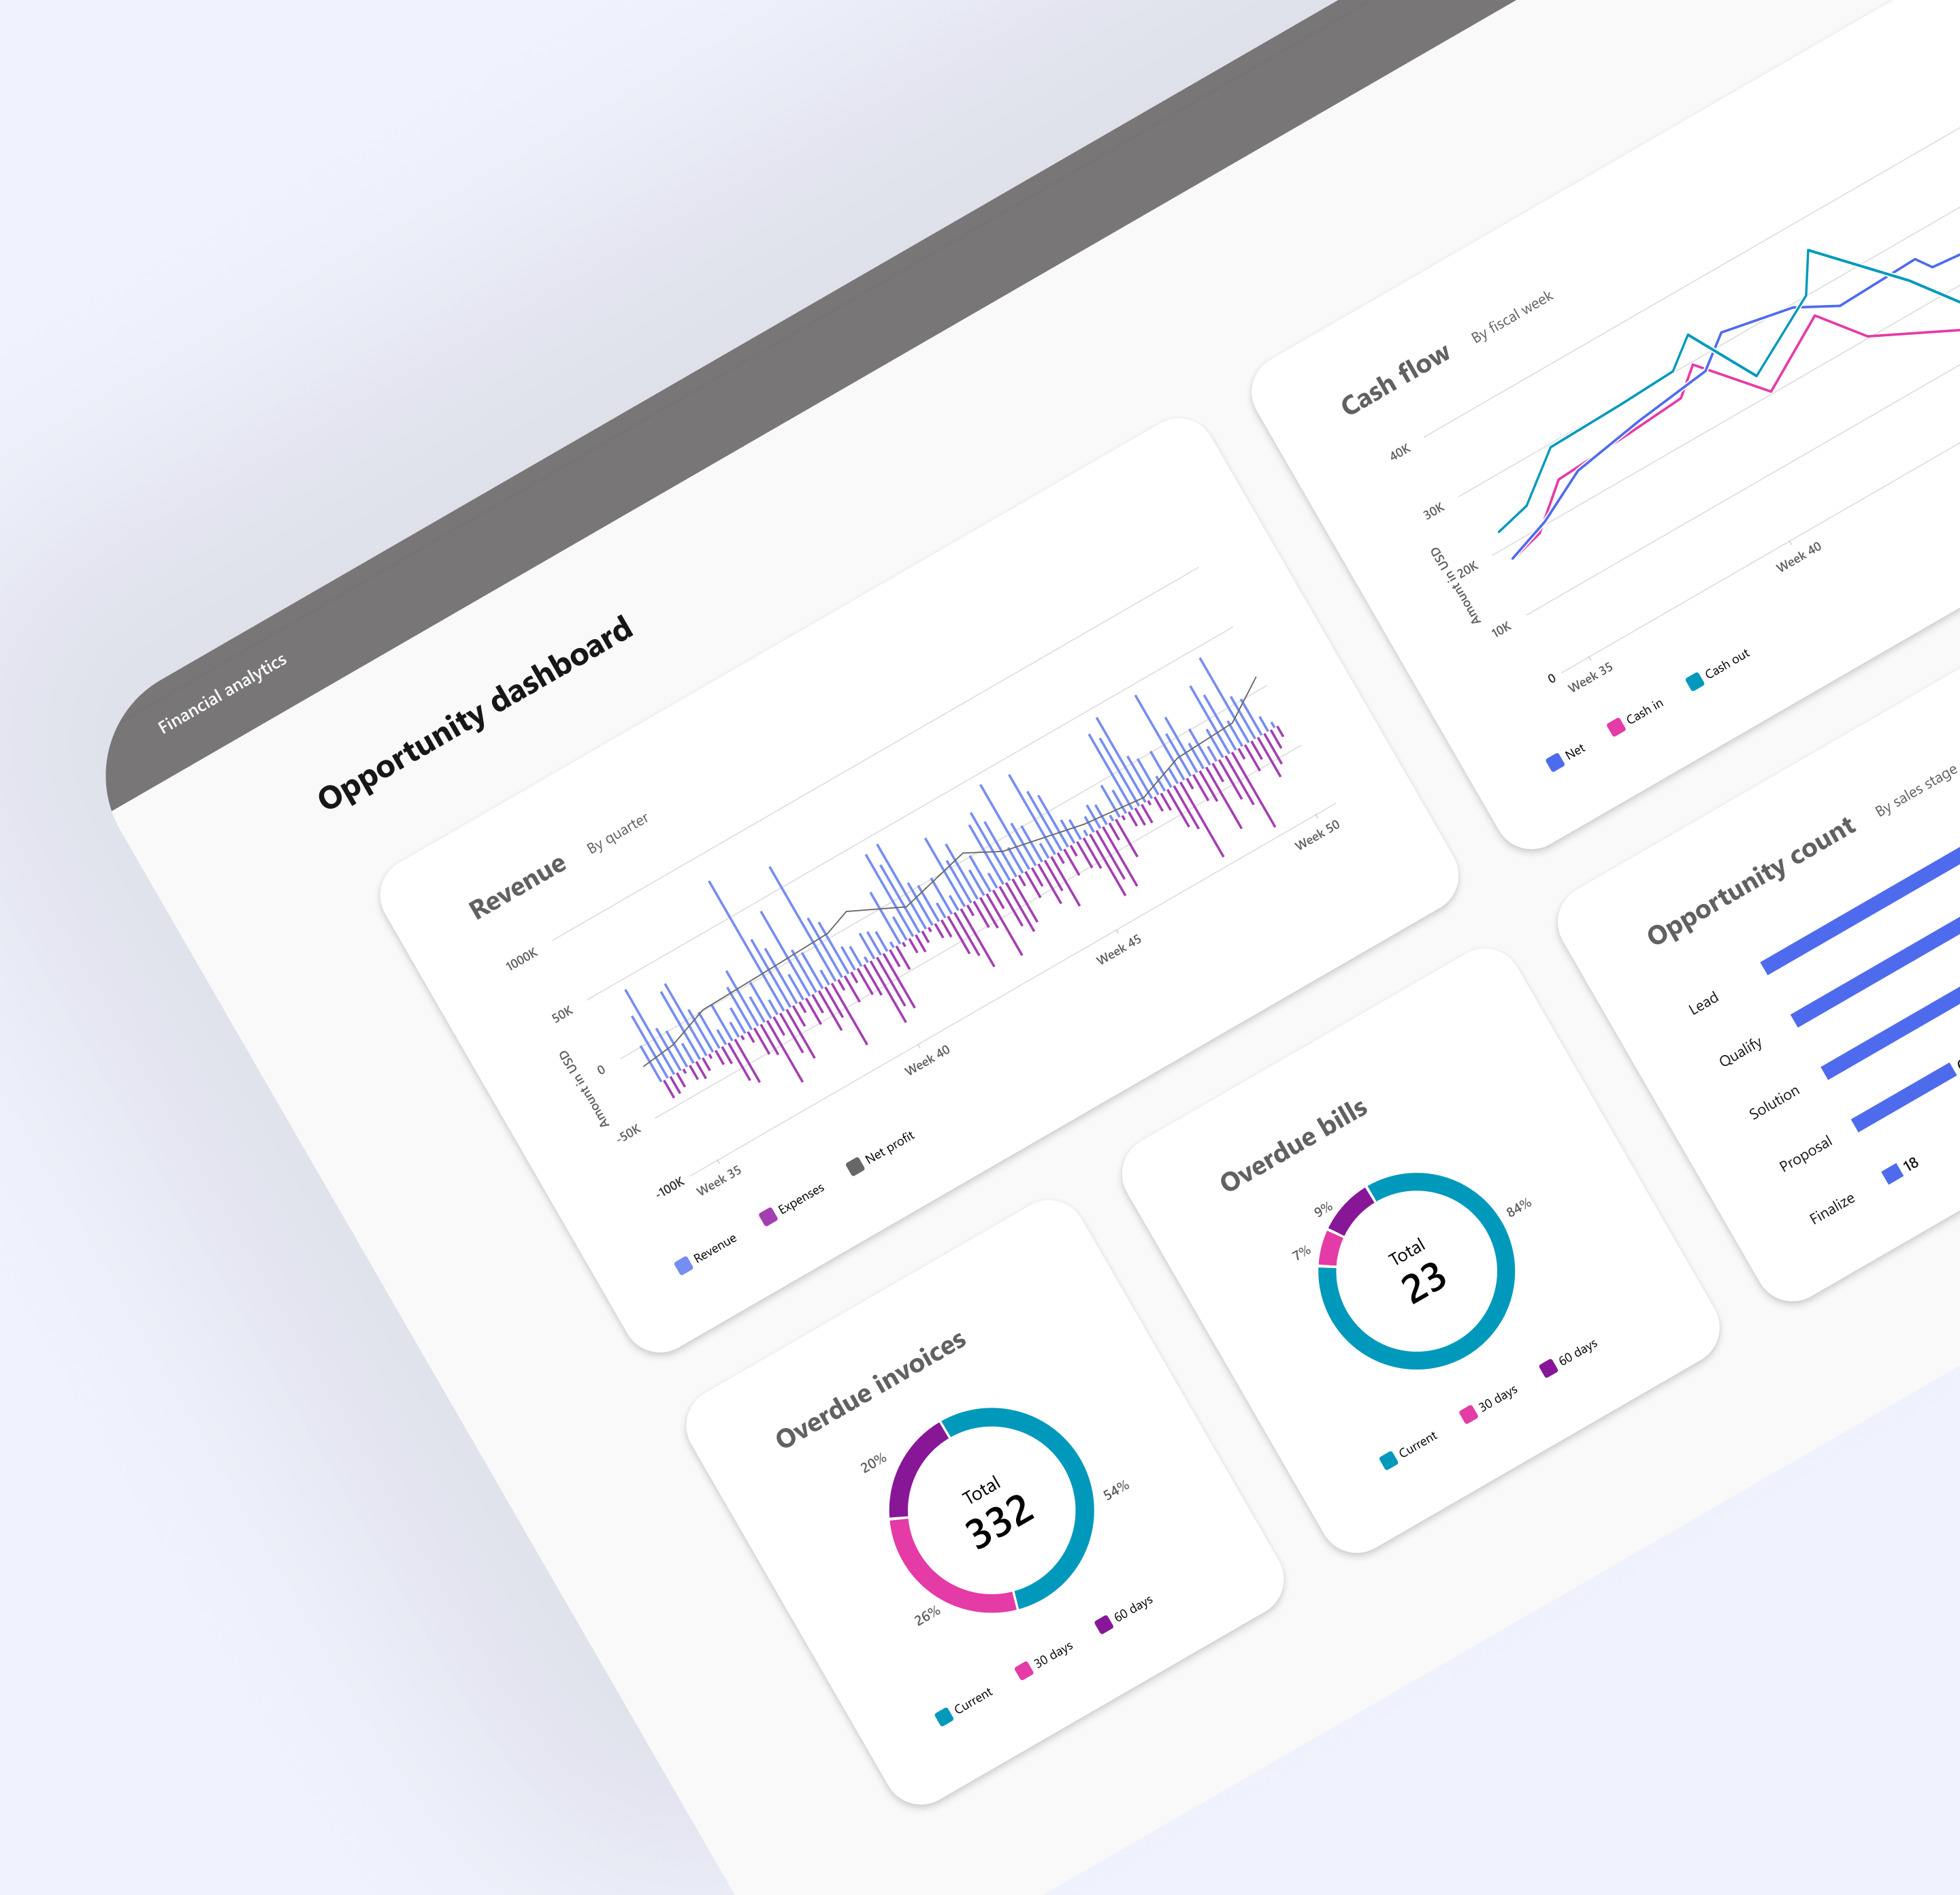 Dashboard mockup using charts aligned to the data viz guidelines